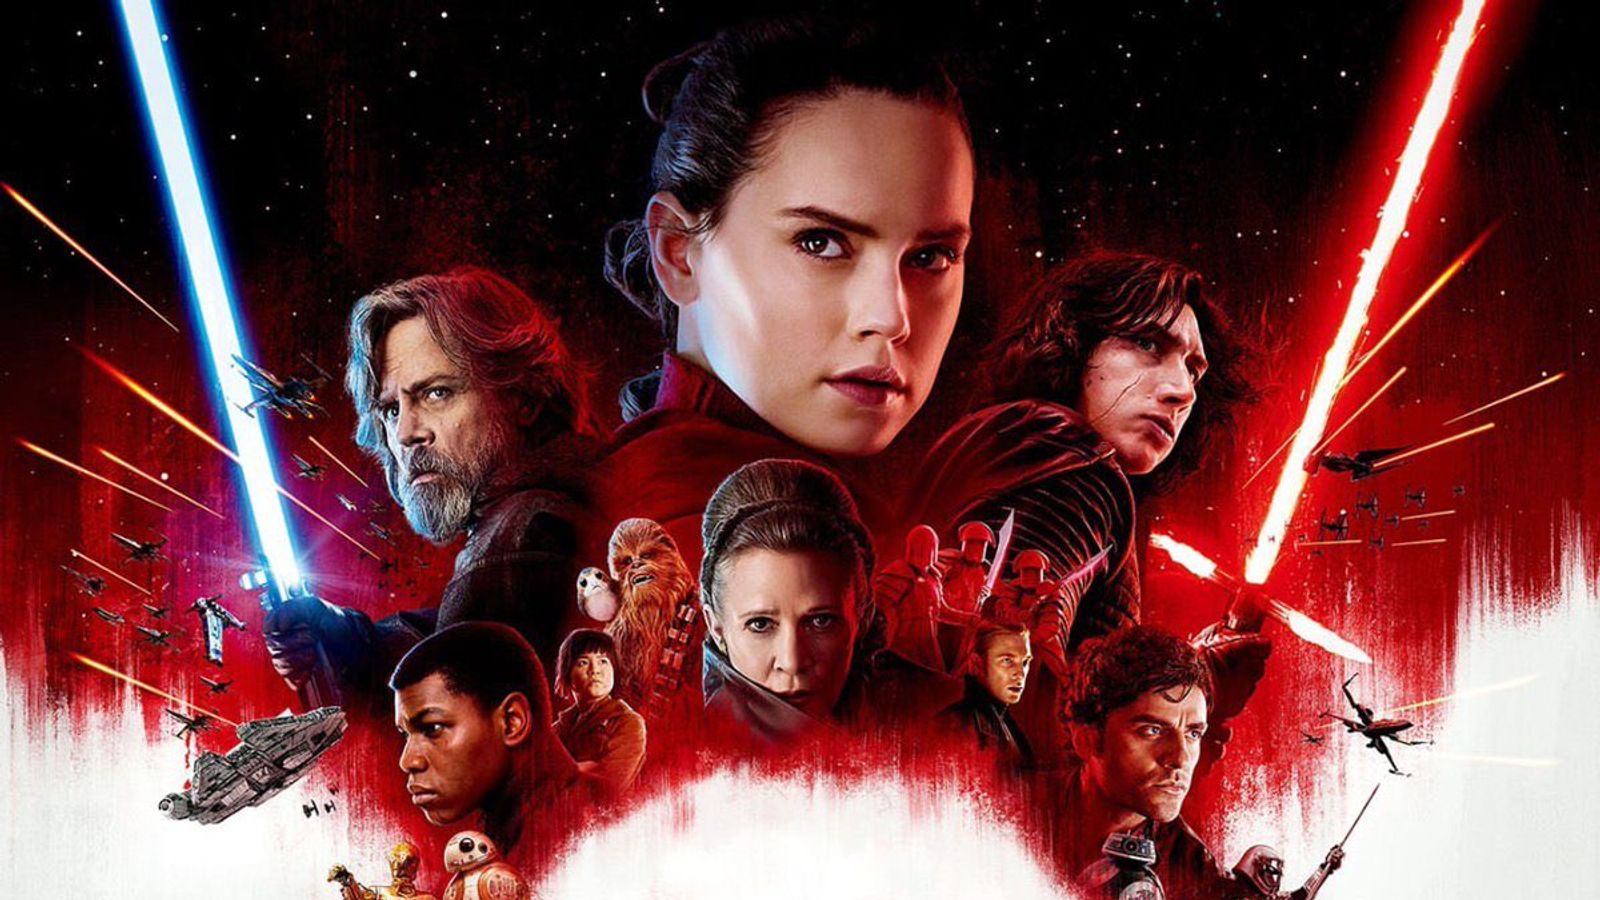 Star Wars The Last Jedi new characters images 